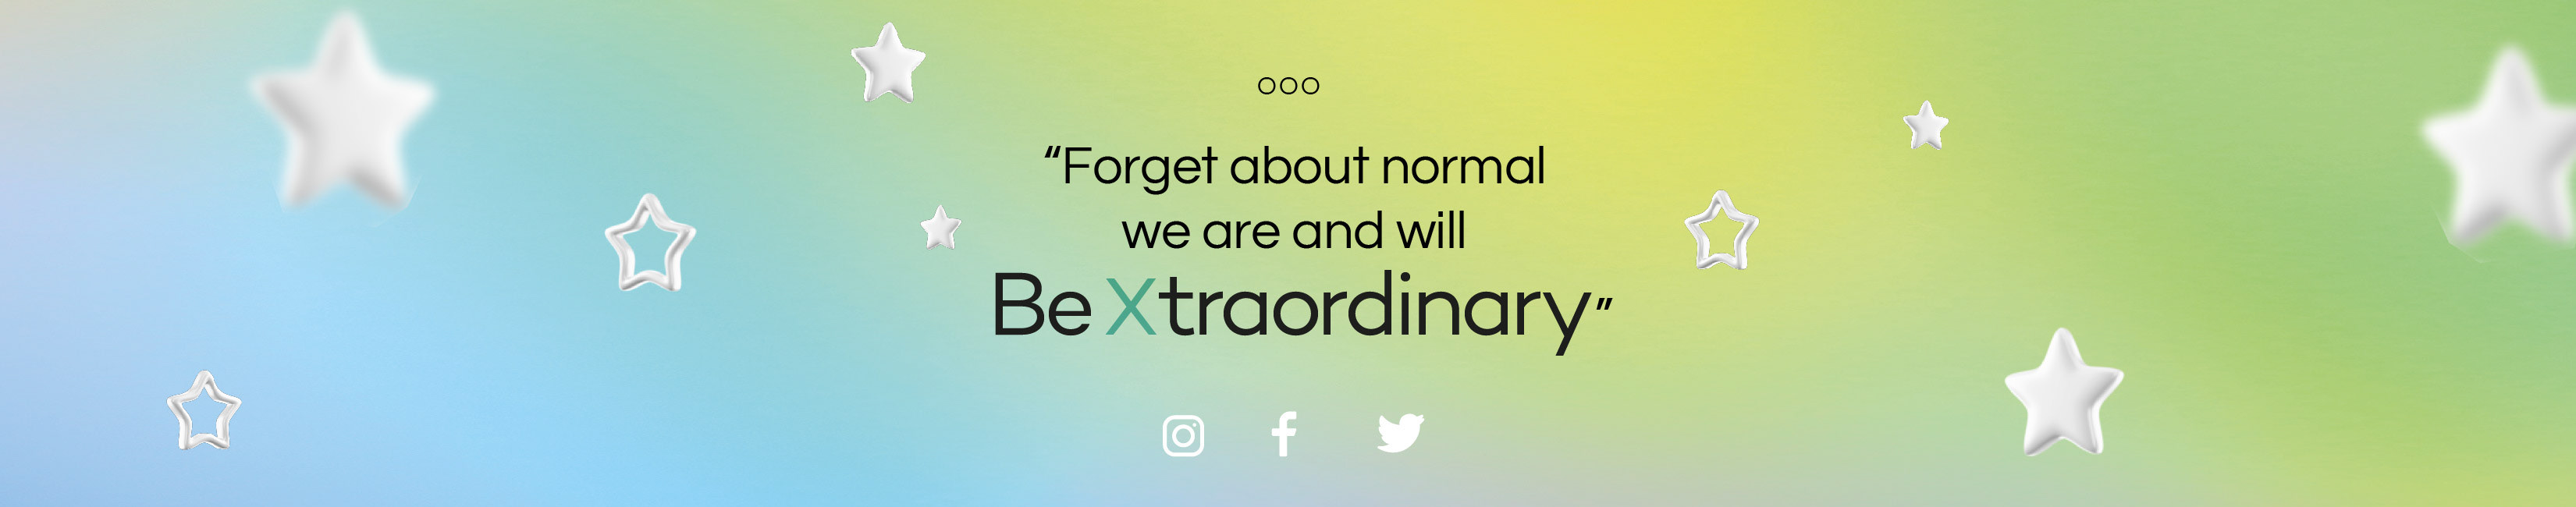 Be Xtraordinary's profile banner